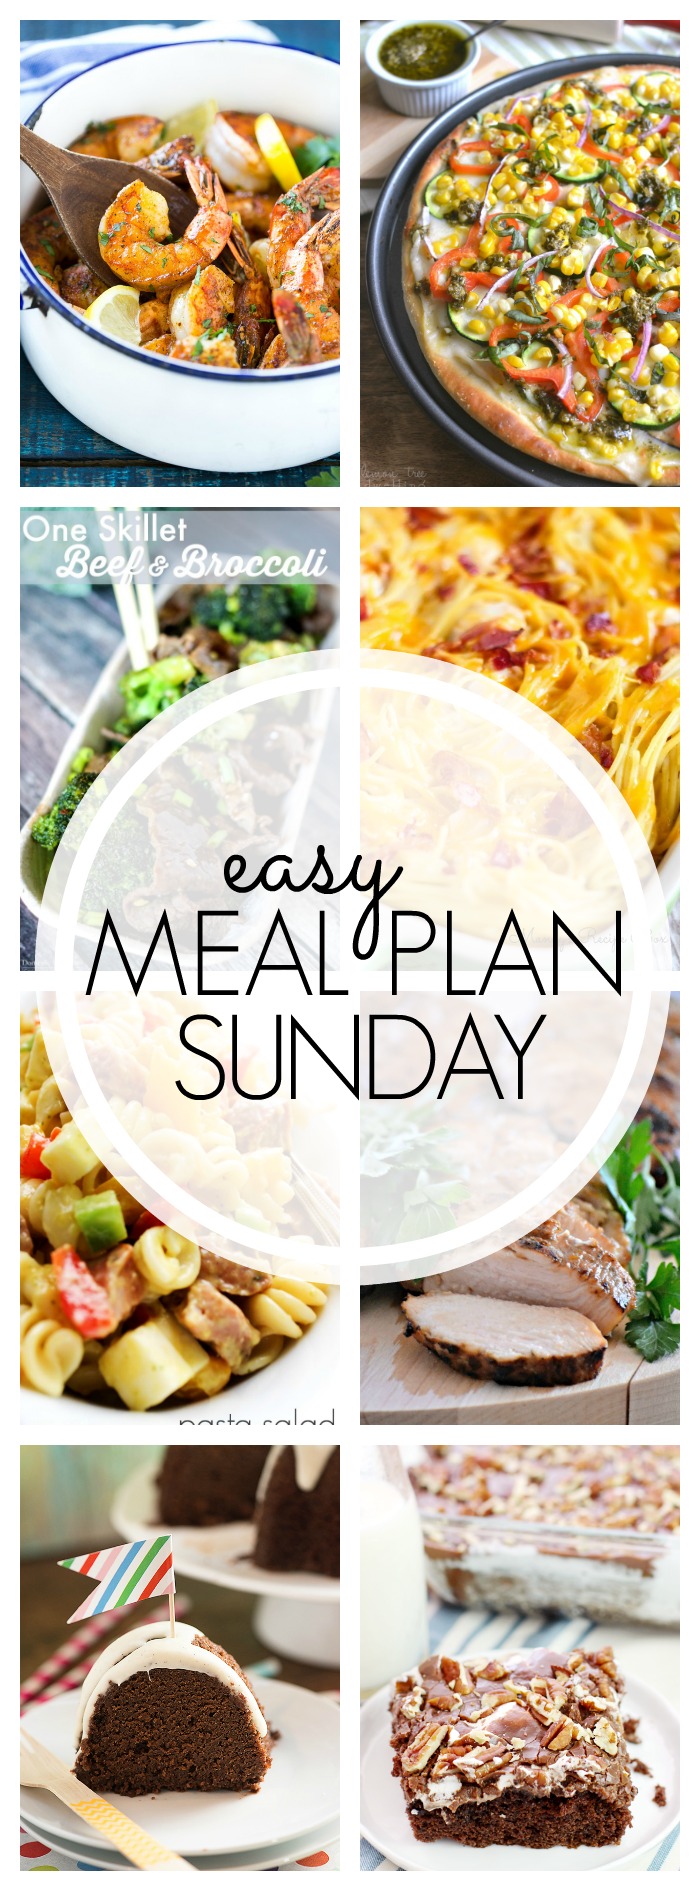 Easy Meal Plan Sunday #58